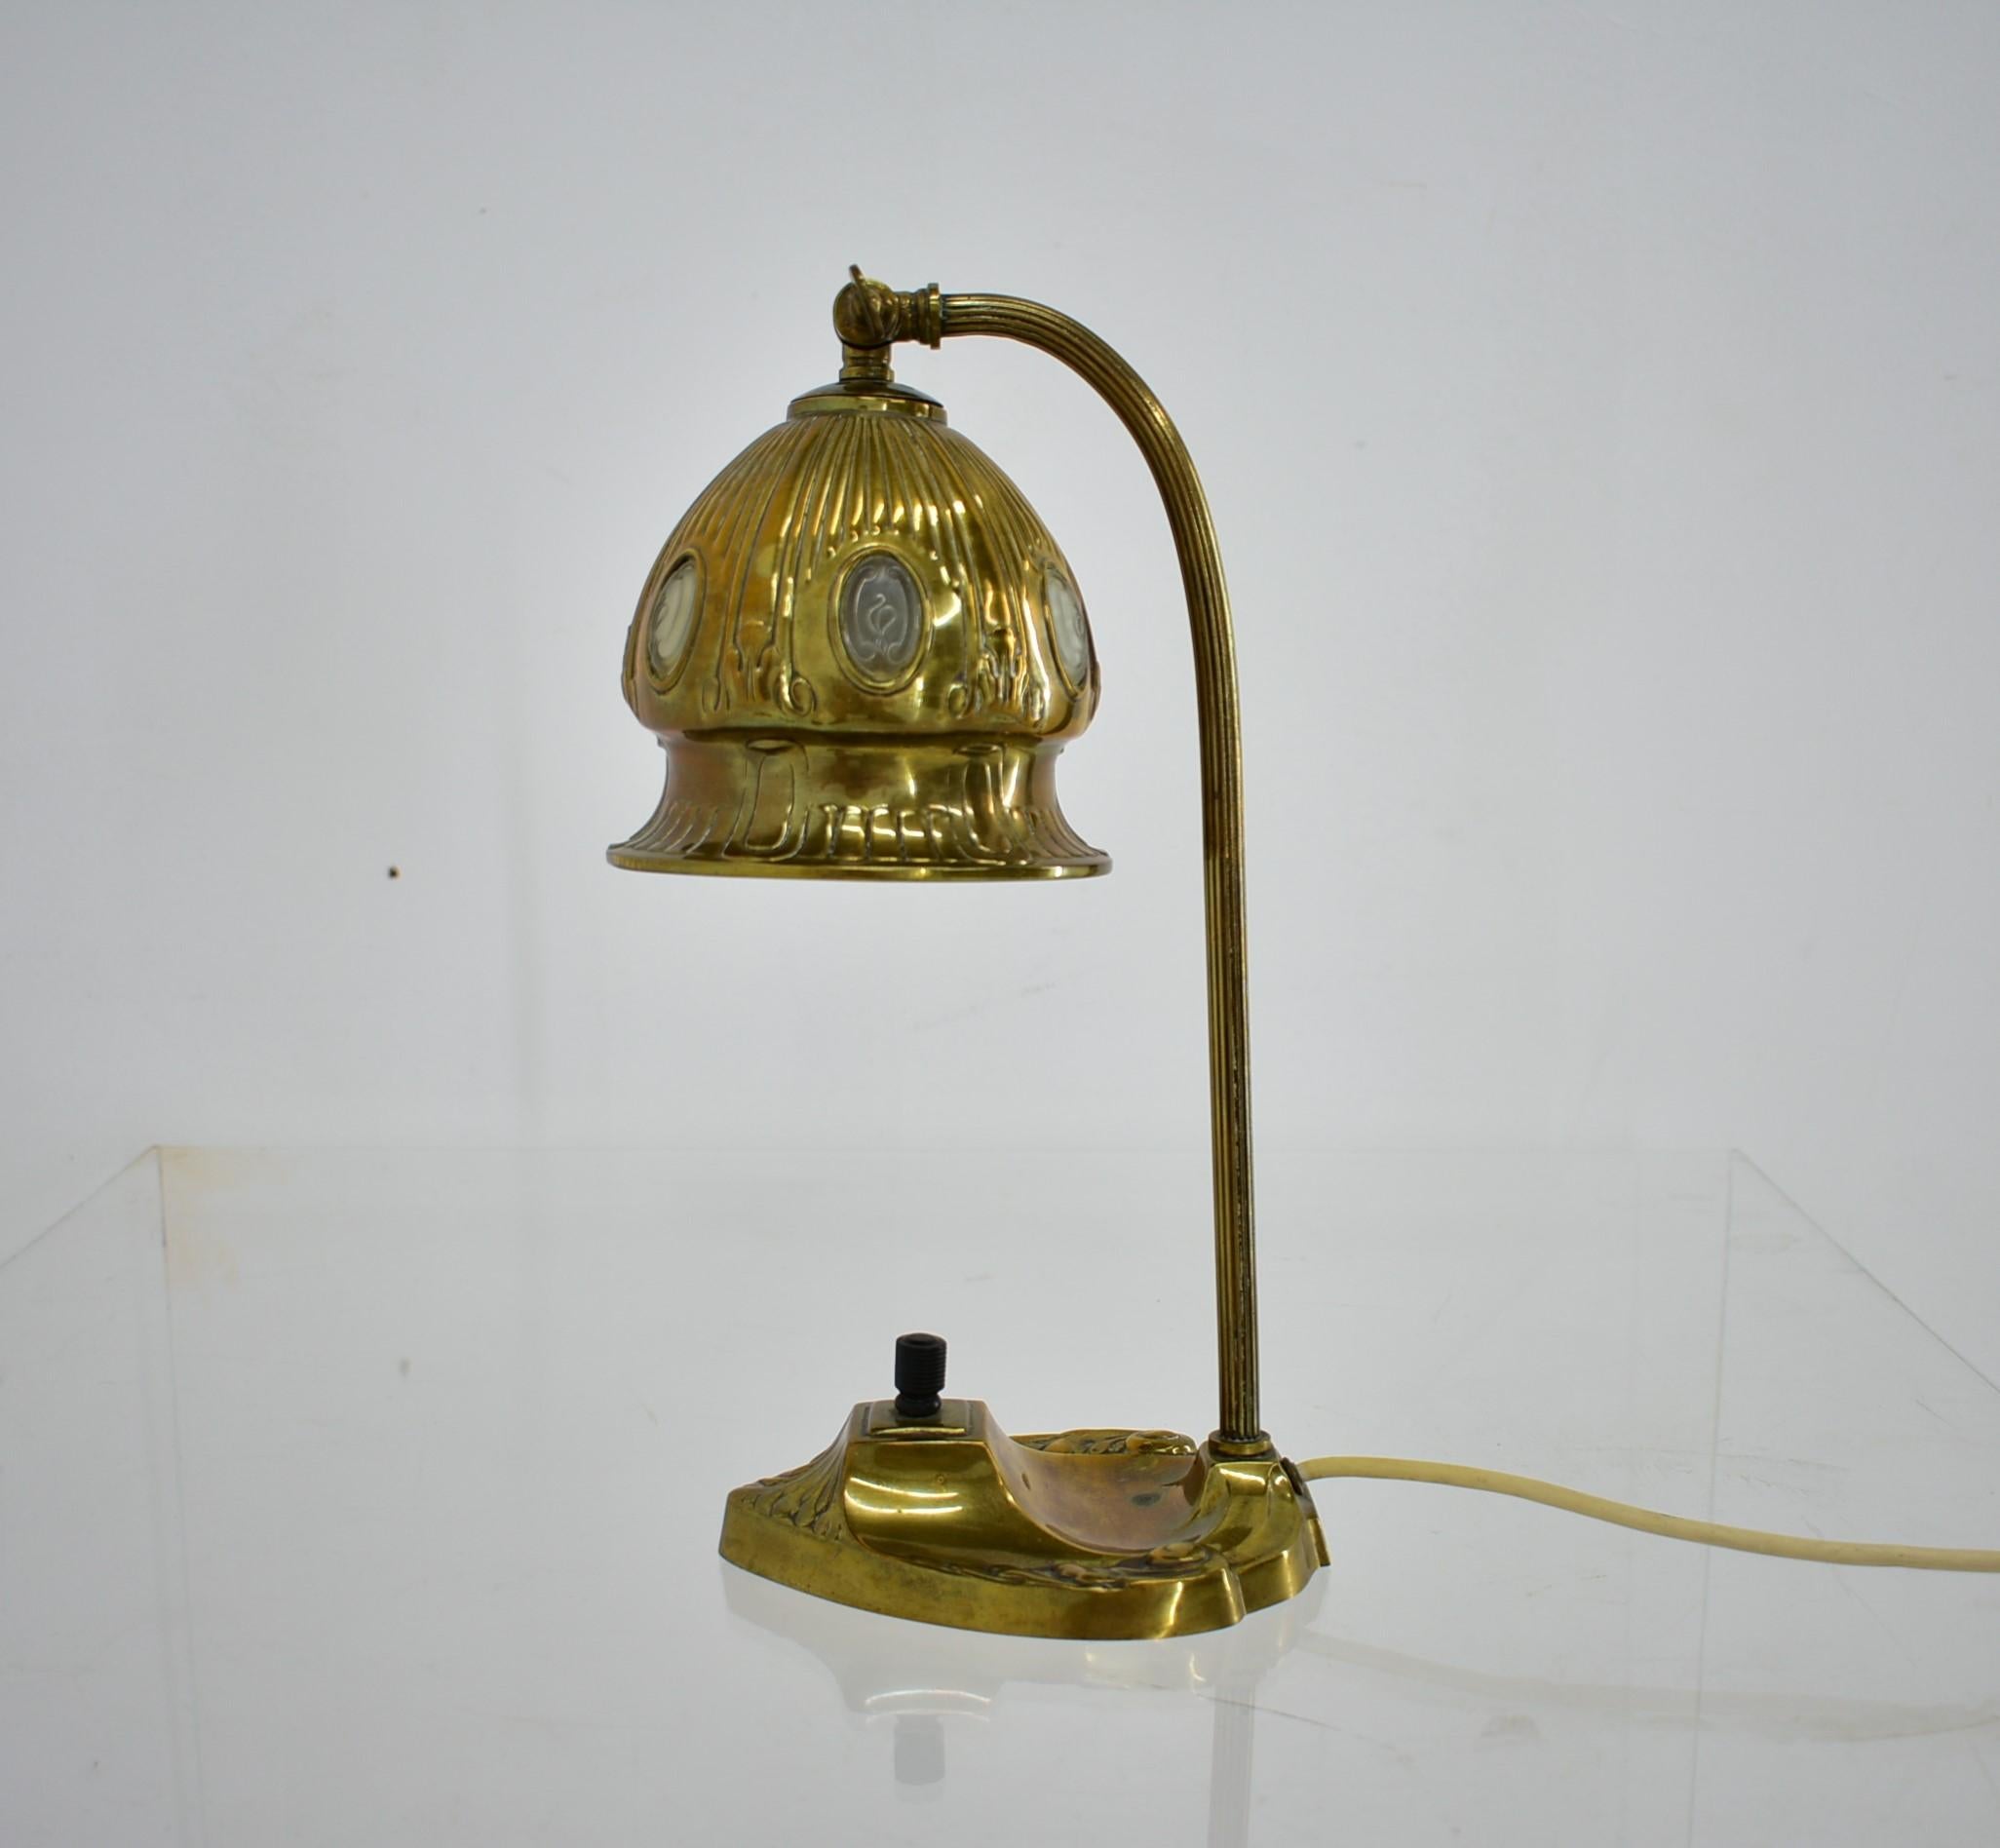 Brass glass vintage table lamp style Vienna Secession, which was made 1930s, Austria.
The brass construction shows beautiful brass patina.